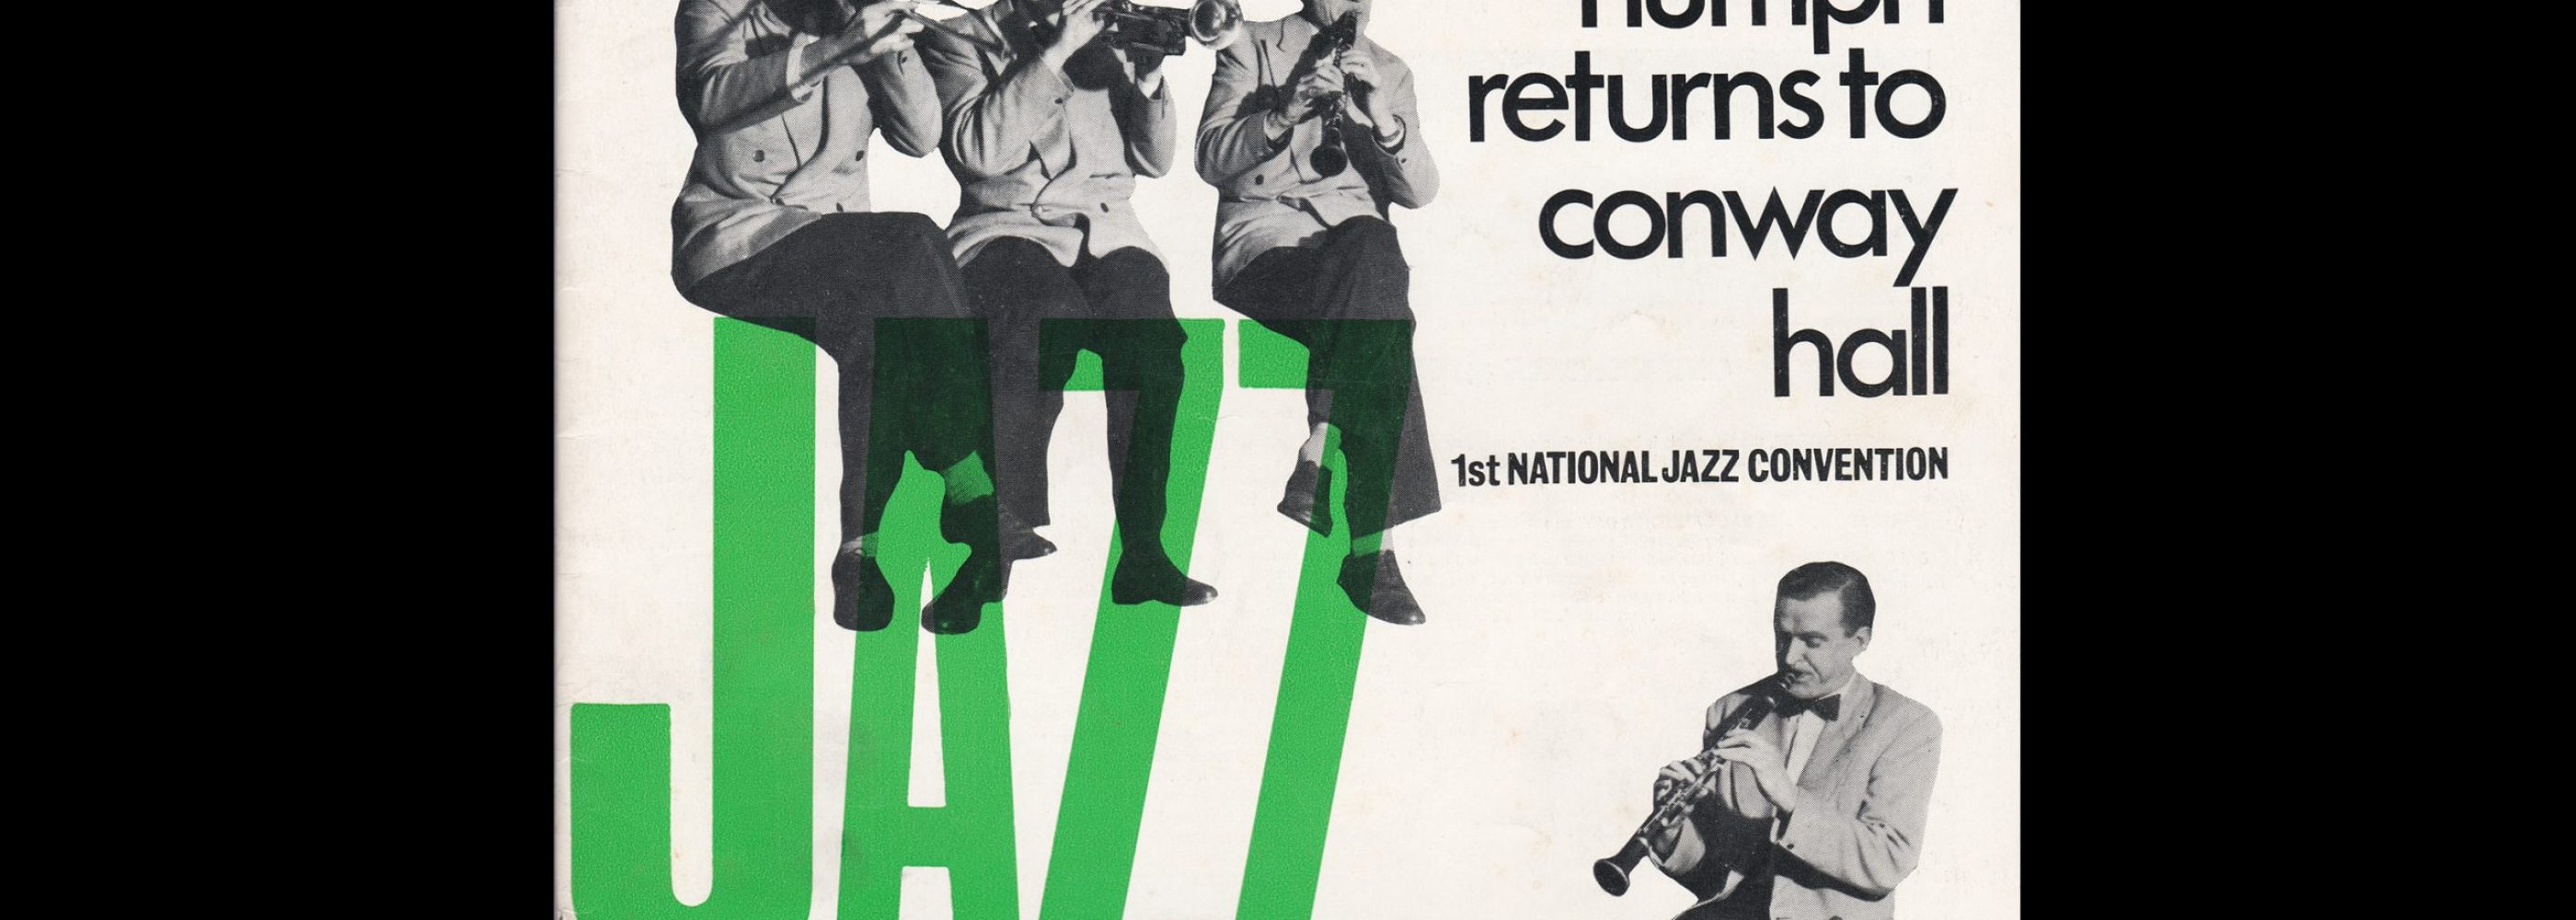 Jazz Journal, 6, 1969. Cover design by Cal Swann